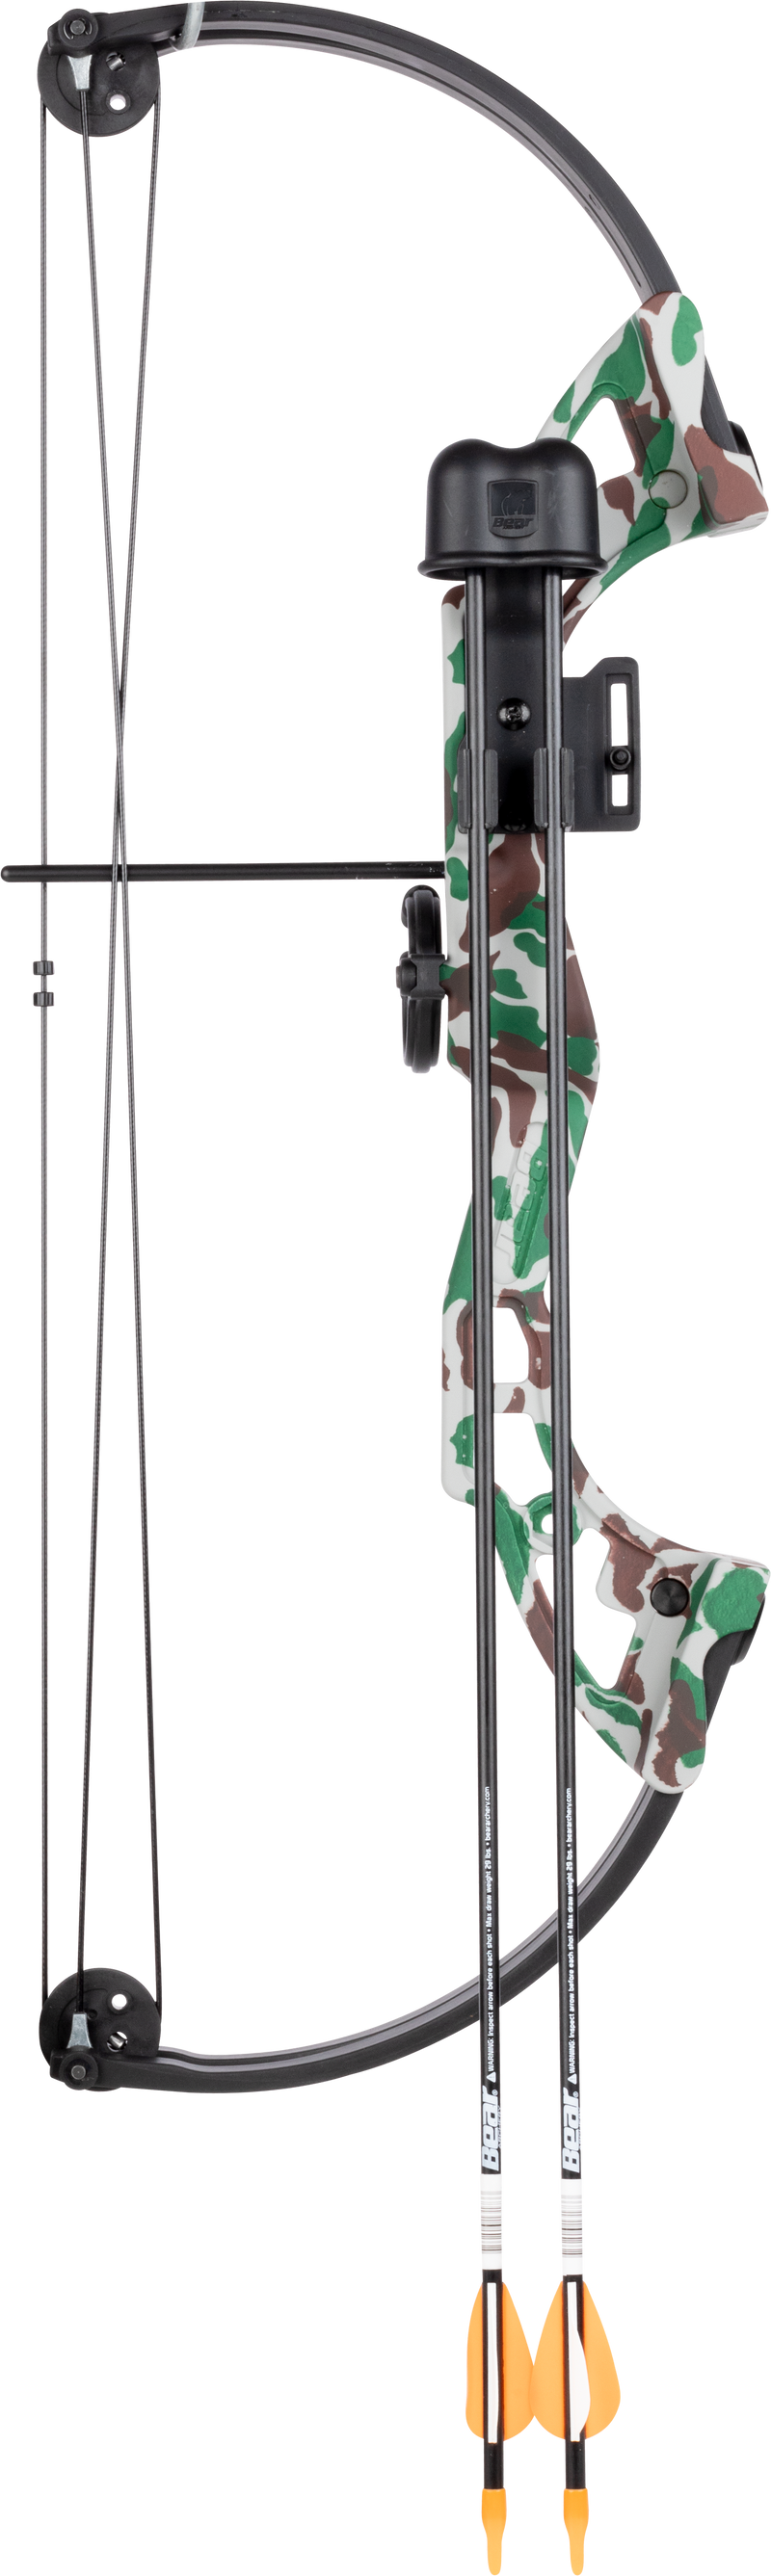 Archery Mini Compound Bow and Arrows Set 25lbs Complete Compound